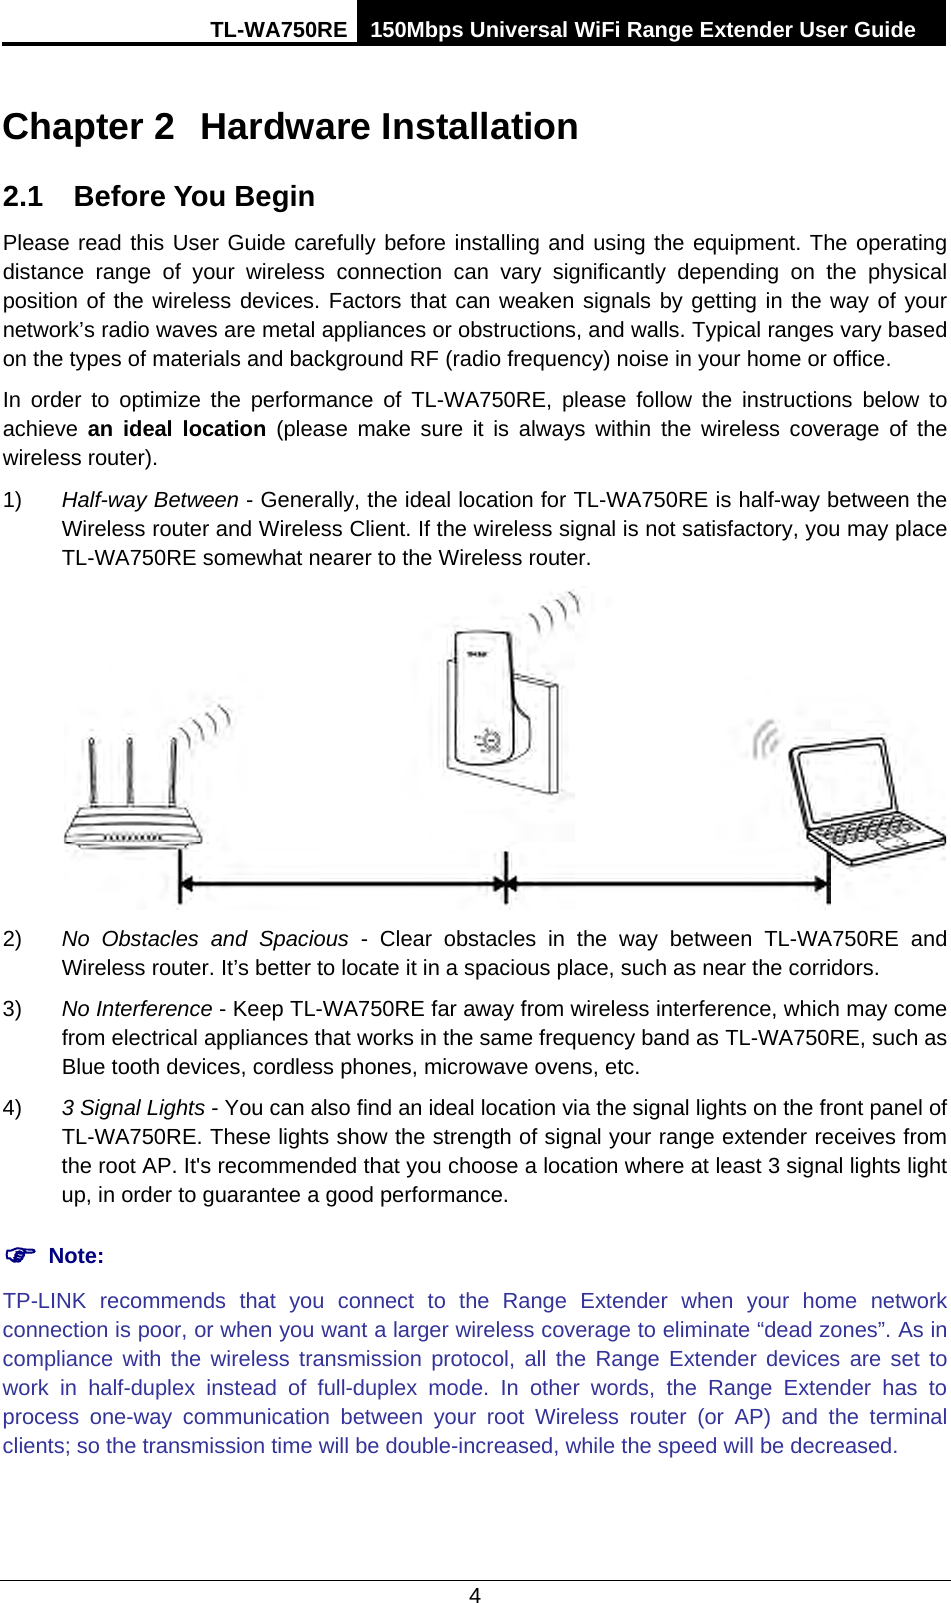 TL-WA750RE 150Mbps Universal WiFi Range Extender User Guide  4 Chapter 2 Hardware Installation 2.1 Before You Begin Please read this User Guide carefully before installing and using the equipment. The operating distance range of your wireless connection can vary significantly depending on the physical position of the wireless devices. Factors that can weaken signals by getting in the way of your network’s radio waves are metal appliances or obstructions, and walls. Typical ranges vary based on the types of materials and background RF (radio frequency) noise in your home or office. In order to optimize the performance of TL-WA750RE, please follow the instructions below to achieve  an ideal location (please make sure it is always within the wireless coverage of the wireless router). 1) Half-way Between - Generally, the ideal location for TL-WA750RE is half-way between the Wireless router and Wireless Client. If the wireless signal is not satisfactory, you may place TL-WA750RE somewhat nearer to the Wireless router.  2) No Obstacles and Spacious - Clear  obstacles in the way between TL-WA750RE and Wireless router. It’s better to locate it in a spacious place, such as near the corridors.   3) No Interference - Keep TL-WA750RE far away from wireless interference, which may come from electrical appliances that works in the same frequency band as TL-WA750RE, such as Blue tooth devices, cordless phones, microwave ovens, etc. 4) 3 Signal Lights - You can also find an ideal location via the signal lights on the front panel of TL-WA750RE. These lights show the strength of signal your range extender receives from the root AP. It&apos;s recommended that you choose a location where at least 3 signal lights light up, in order to guarantee a good performance.        Note: TP-LINK  recommends that you connect to the Range Extender when your home network connection is poor, or when you want a larger wireless coverage to eliminate “dead zones”. As in compliance with the wireless transmission protocol, all the Range Extender devices are set to work in half-duplex instead of full-duplex mode. In other words, the Range Extender has to process one-way communication between your root Wireless router (or AP) and the terminal clients; so the transmission time will be double-increased, while the speed will be decreased.   